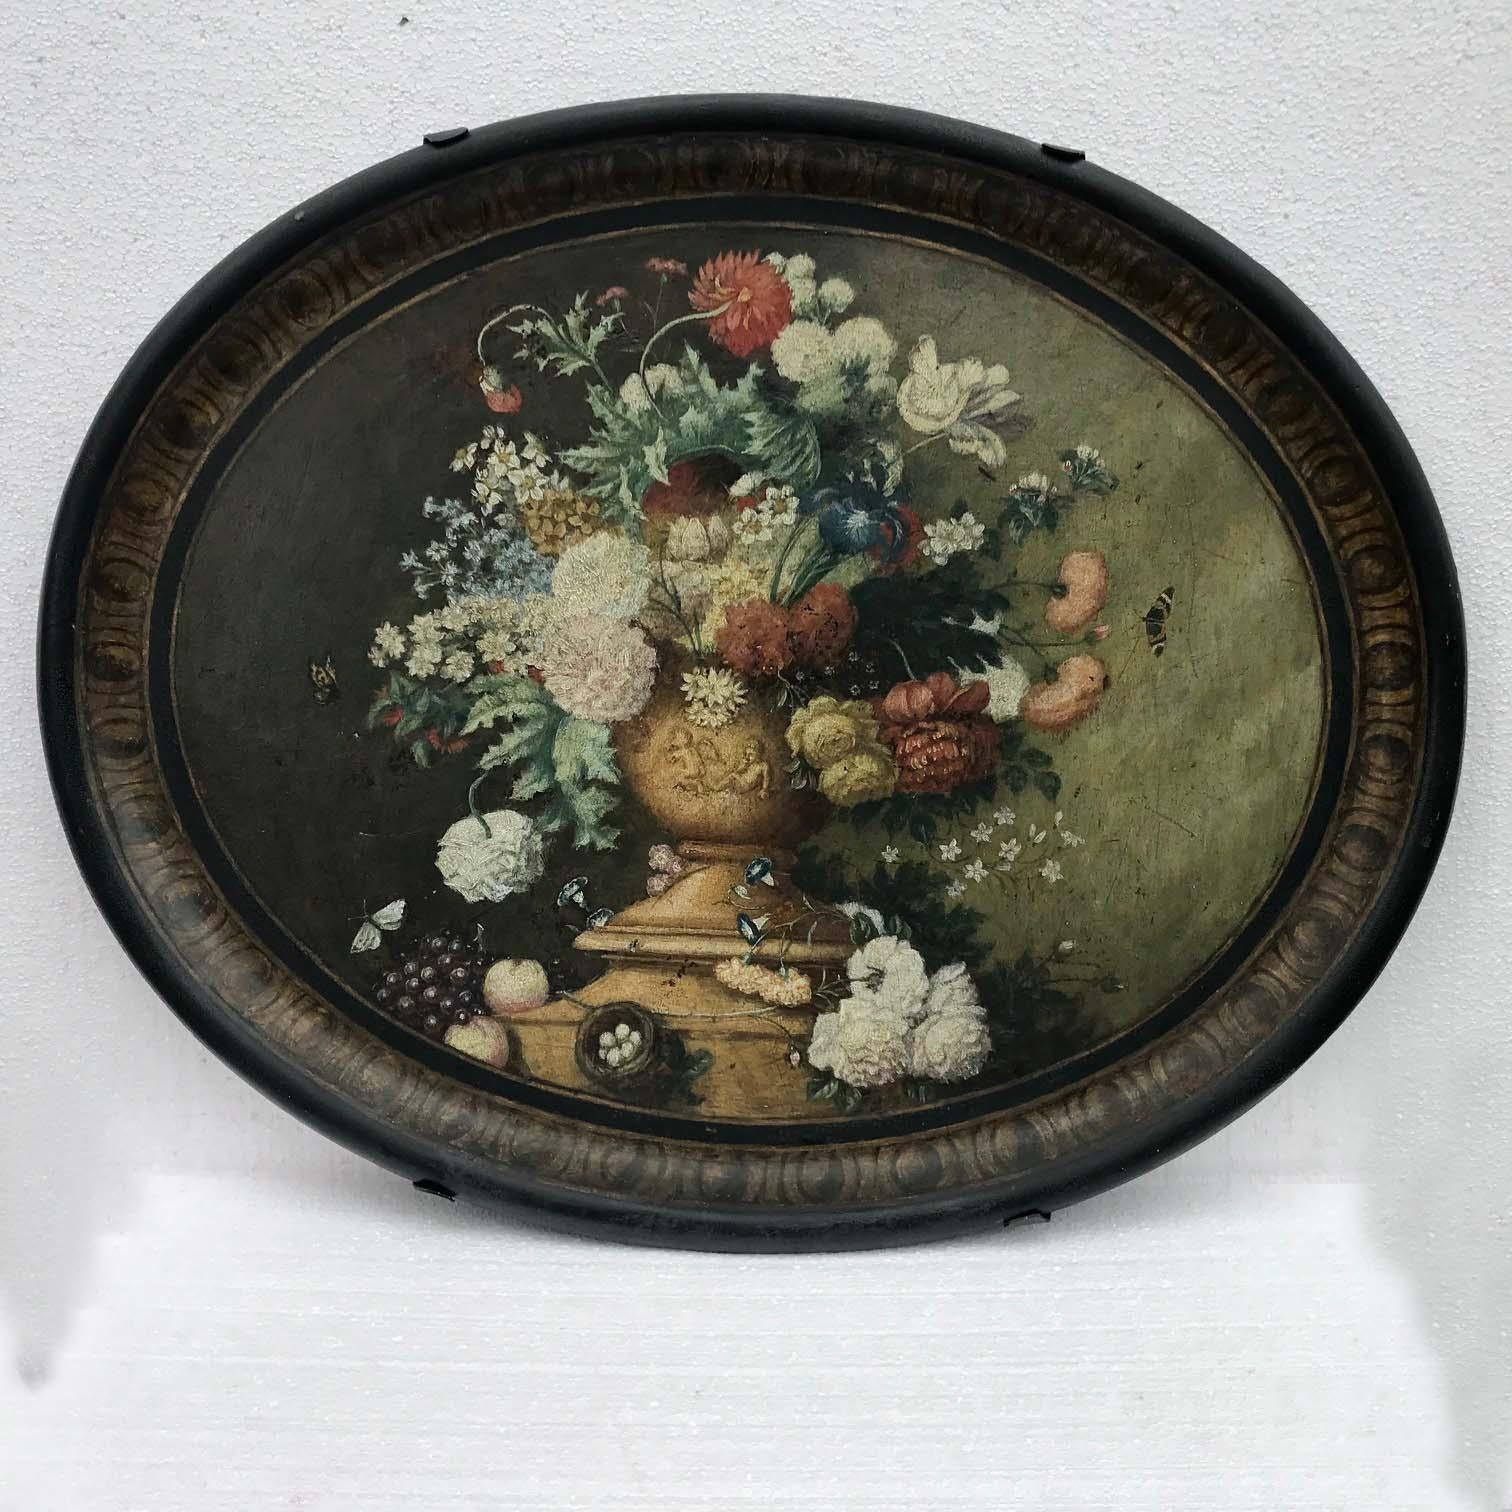 This oval tray is of good large size, often we mount them on stands. In this case, however, the painting is of considerable decorative quality and is very much the kind of still life painting that should be on a wall rather than under a drink.